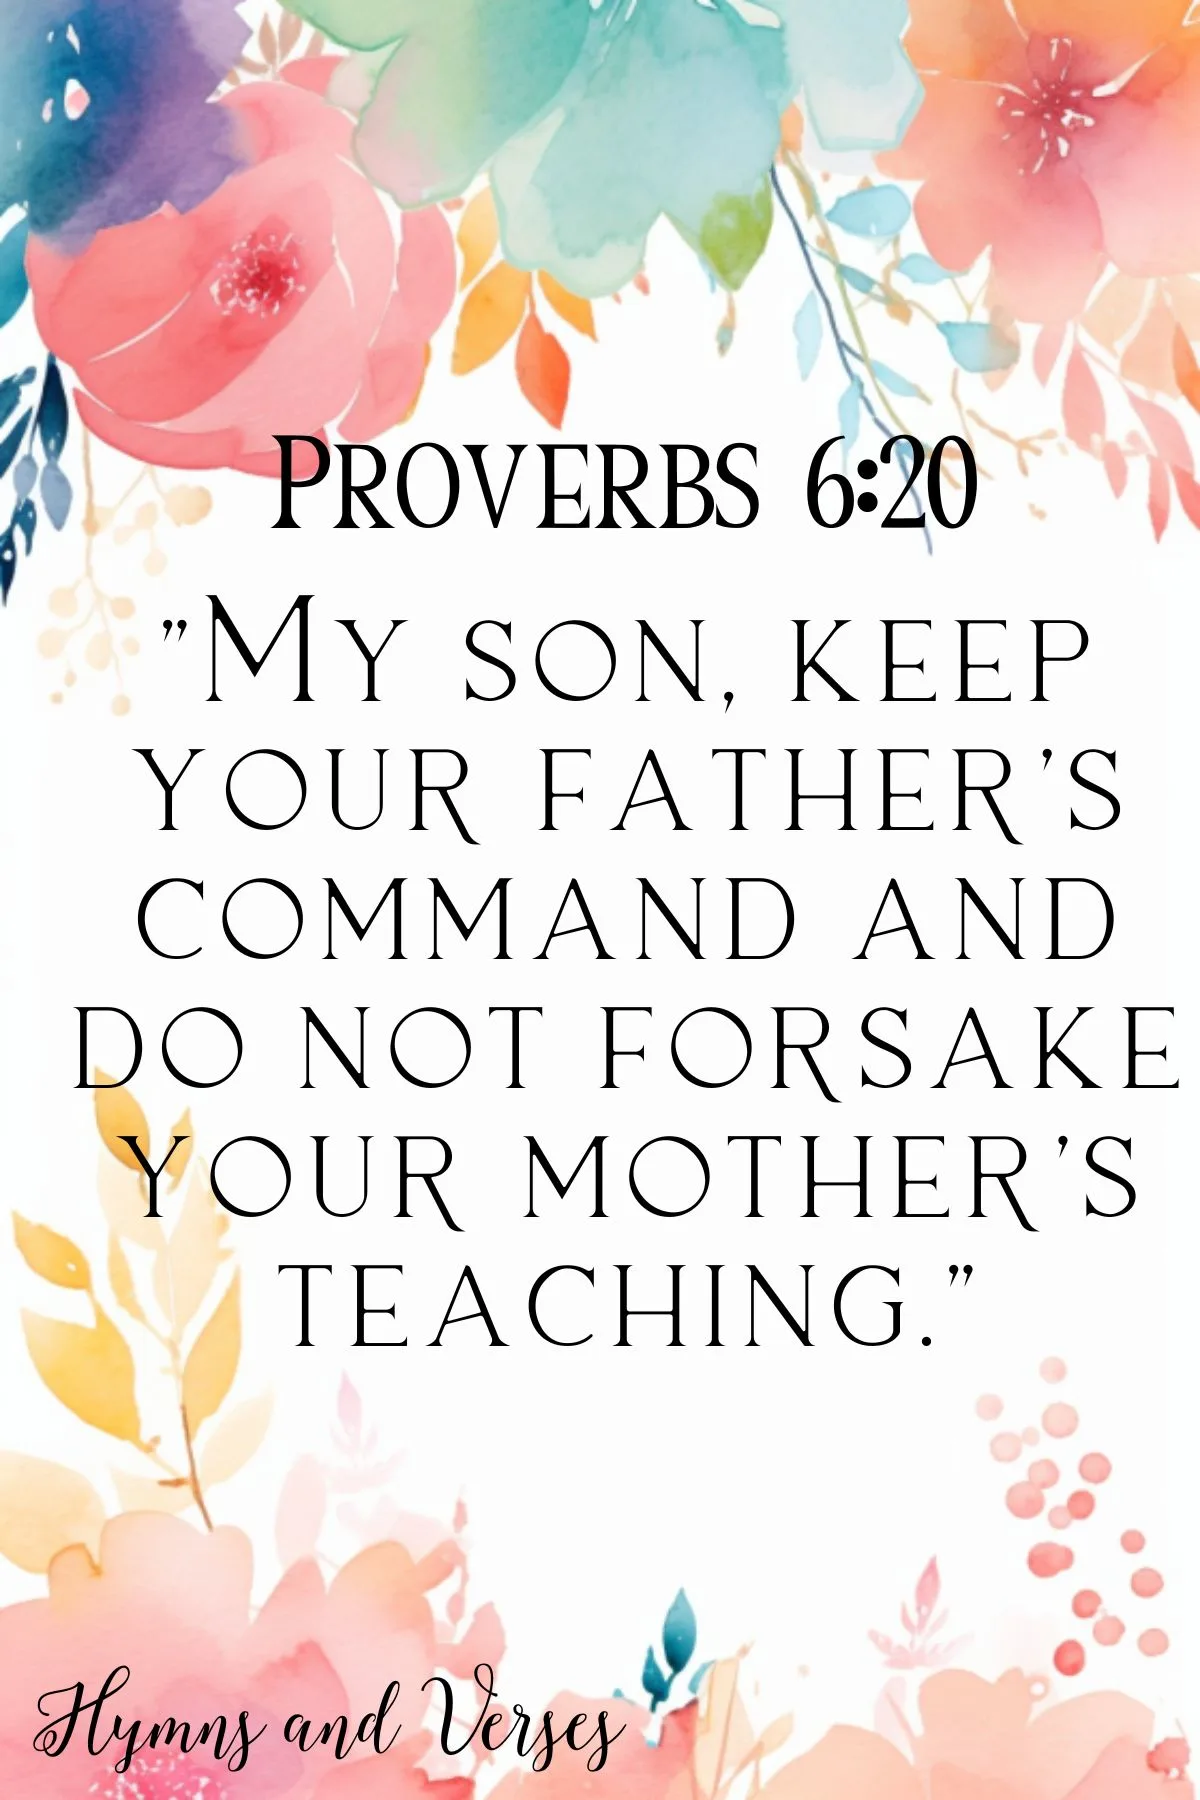 Proverbs 6:20 bible verse for mothers birthday with pretty floral background